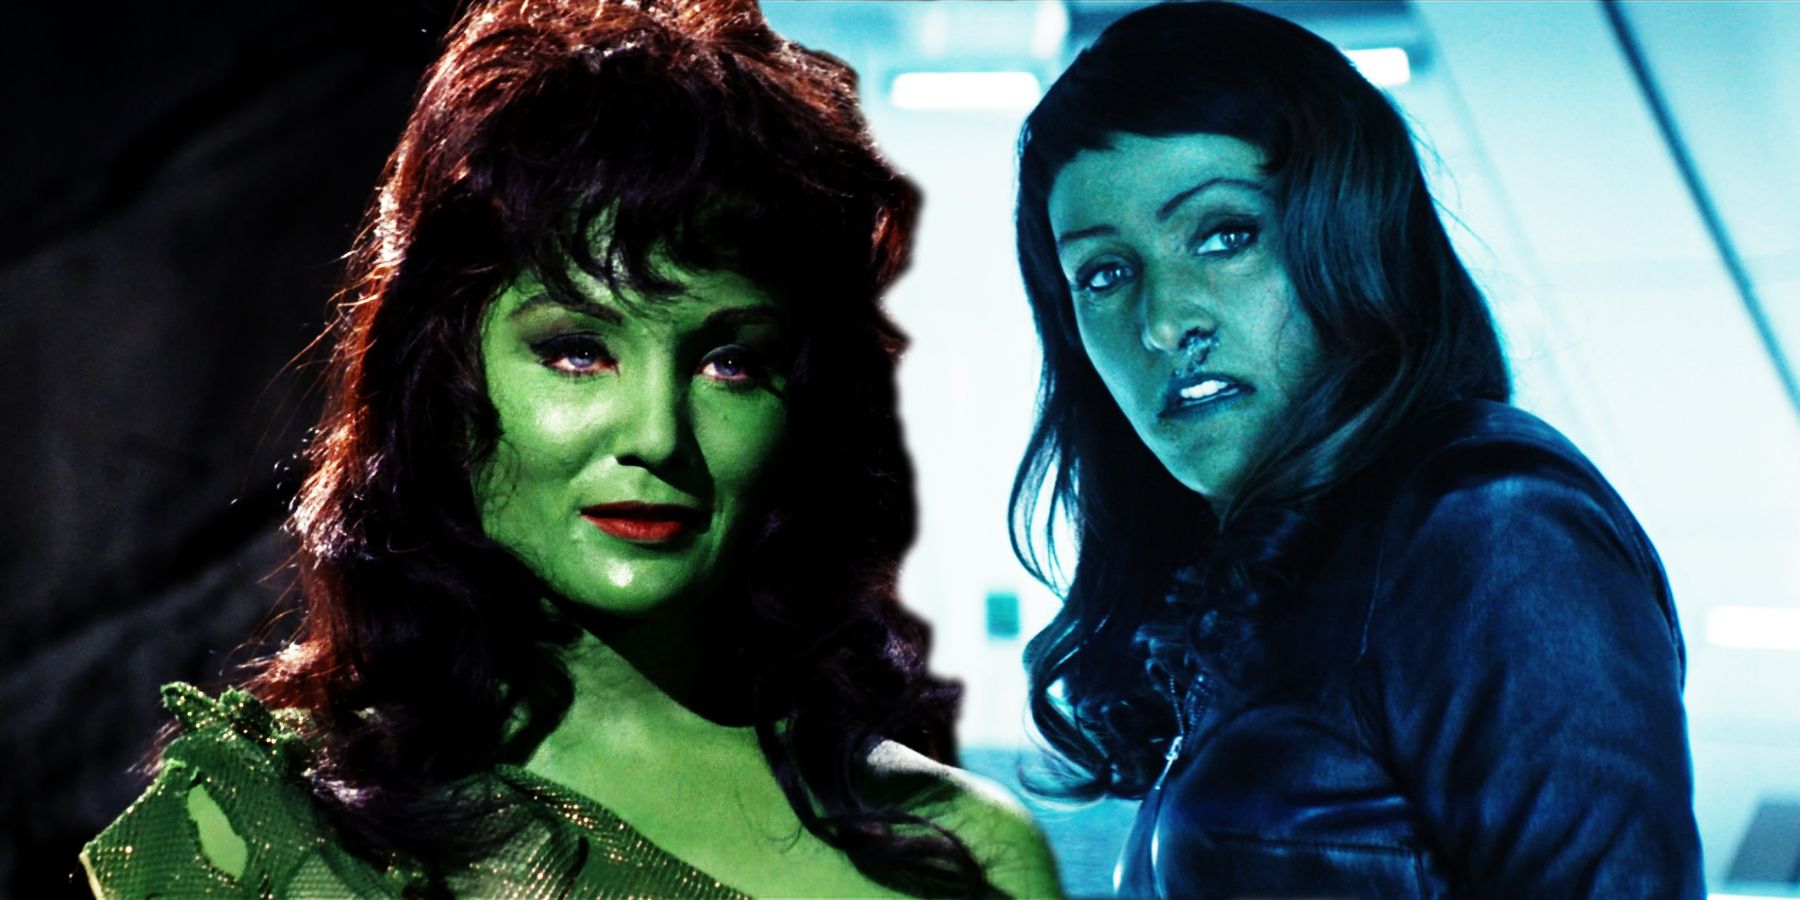 An Orion slave girl from Star Trek: TOS and the Orion pirate leader from Discovery